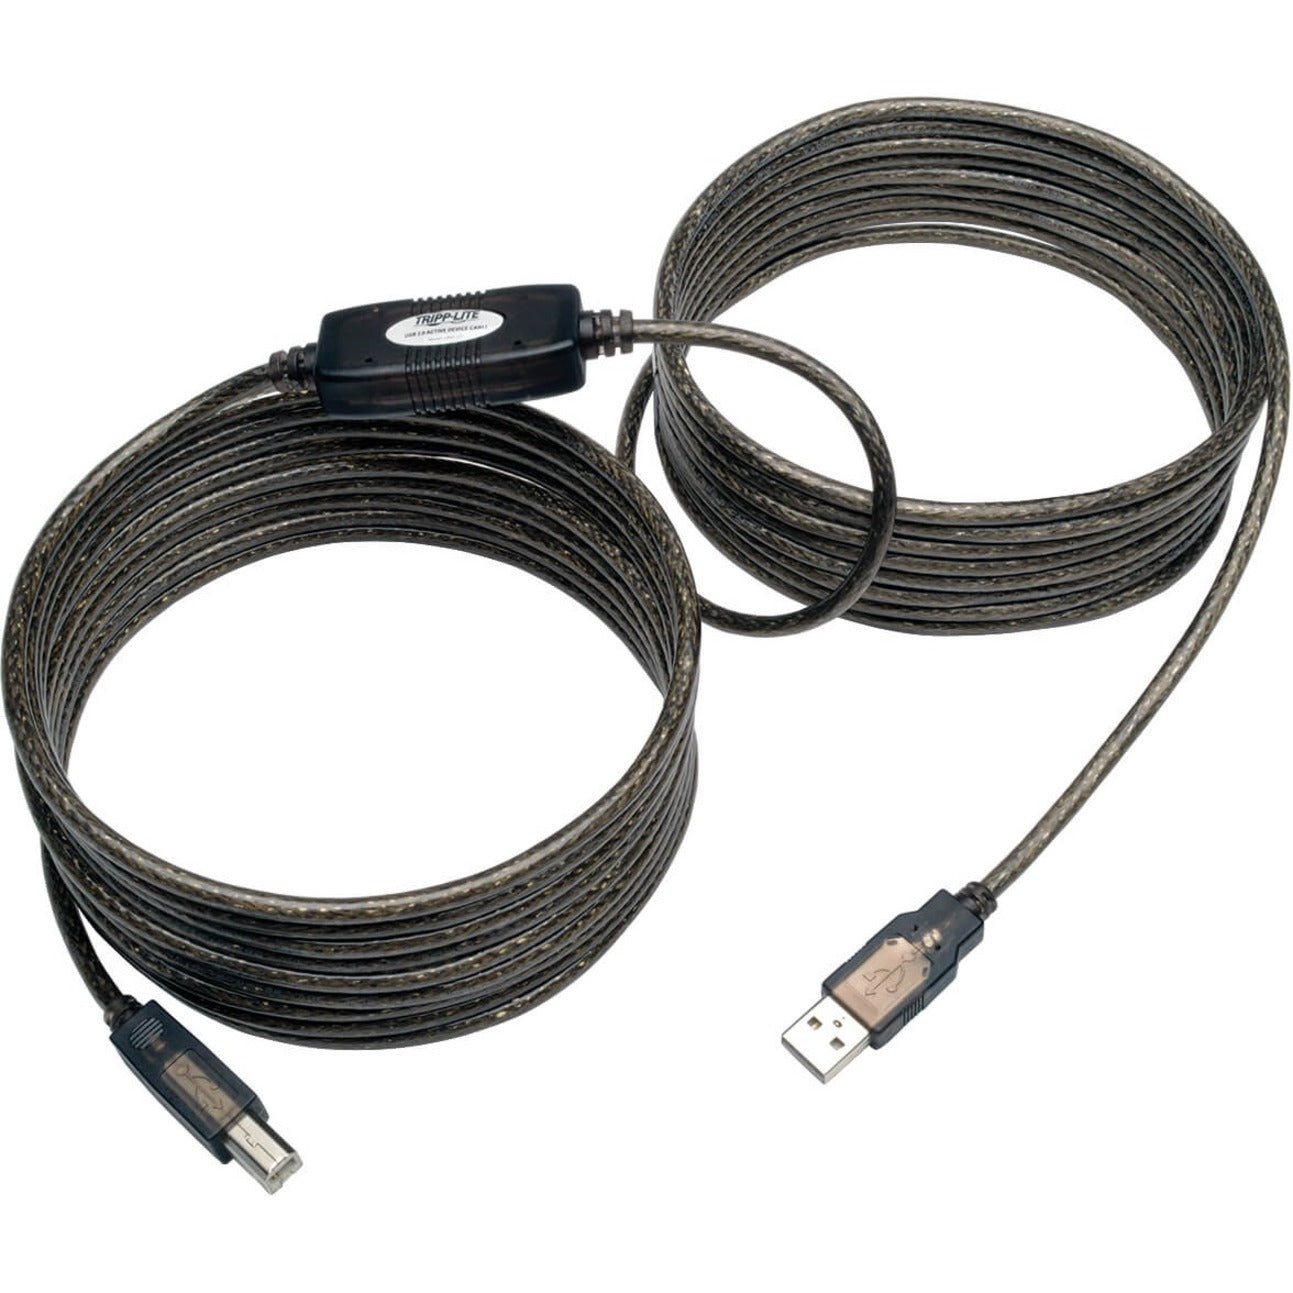 Tripp Lite U042-025 25ft. High-Speed USB2.0 A/B Active Device Cable, Repeater, Printer